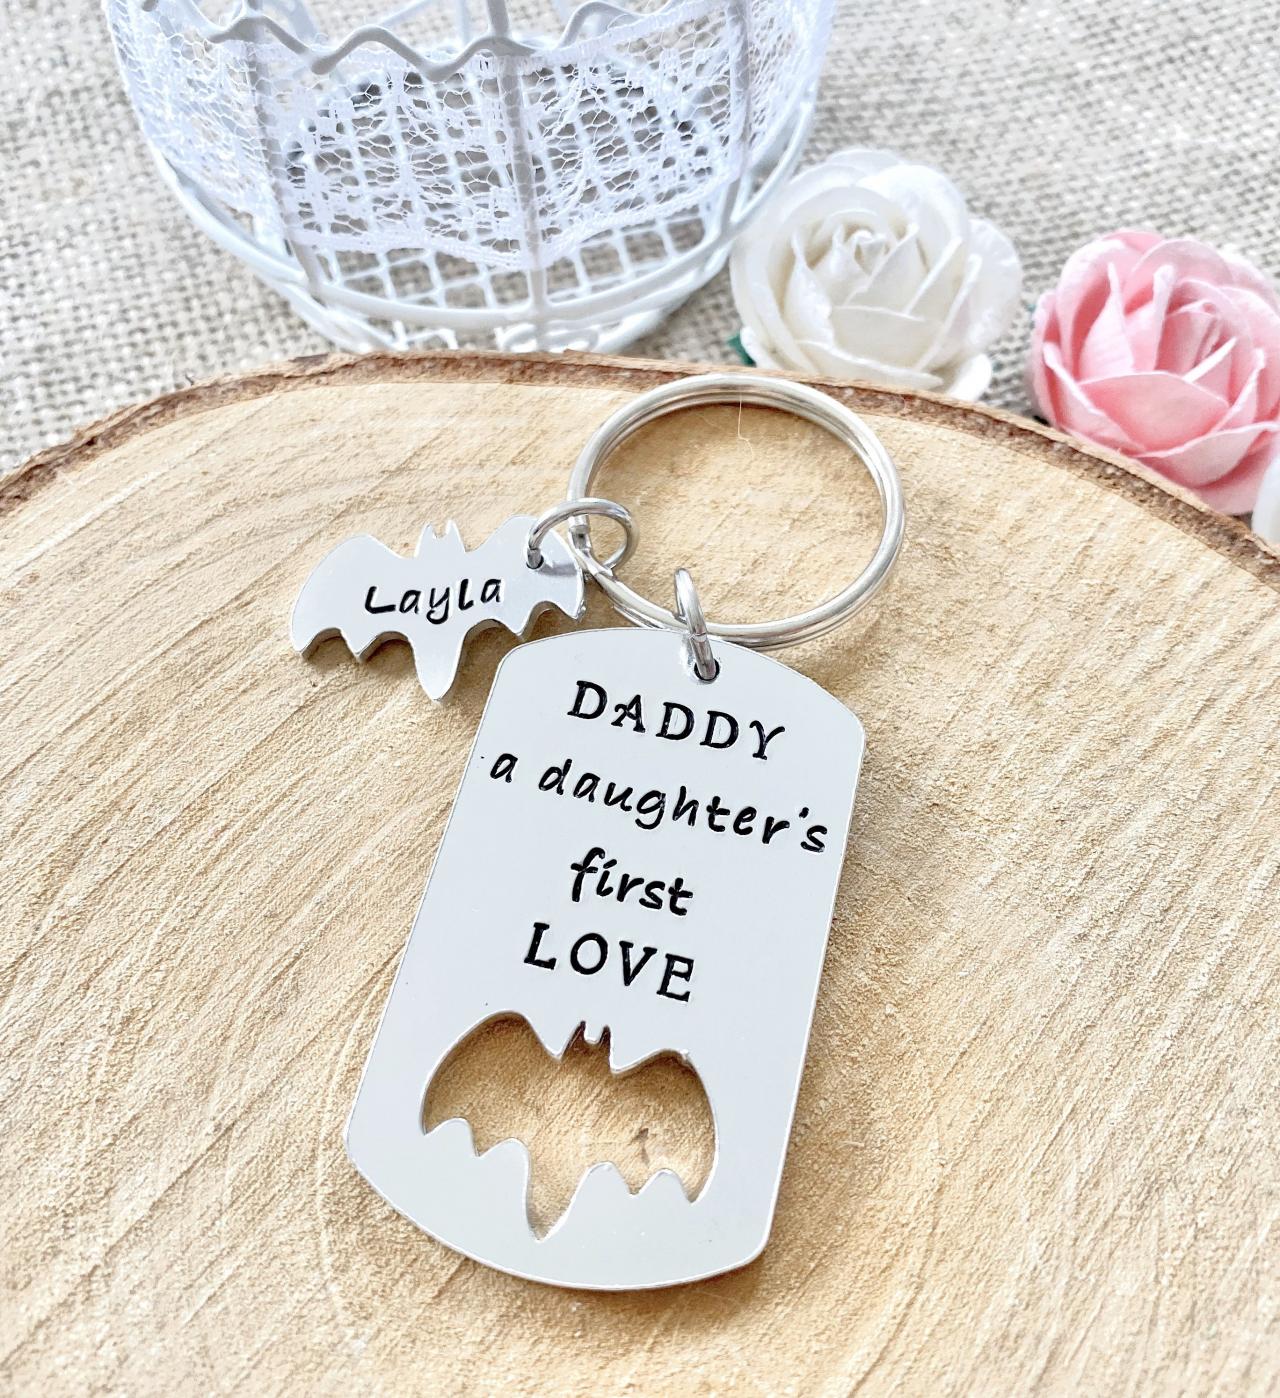 Dad Gift, Gift For Dad, Daddy Gift, Dad, Baby, Gift From Daughter, Dad Birthday Gift, Father's Day Gift, Gift For Daddy, Love